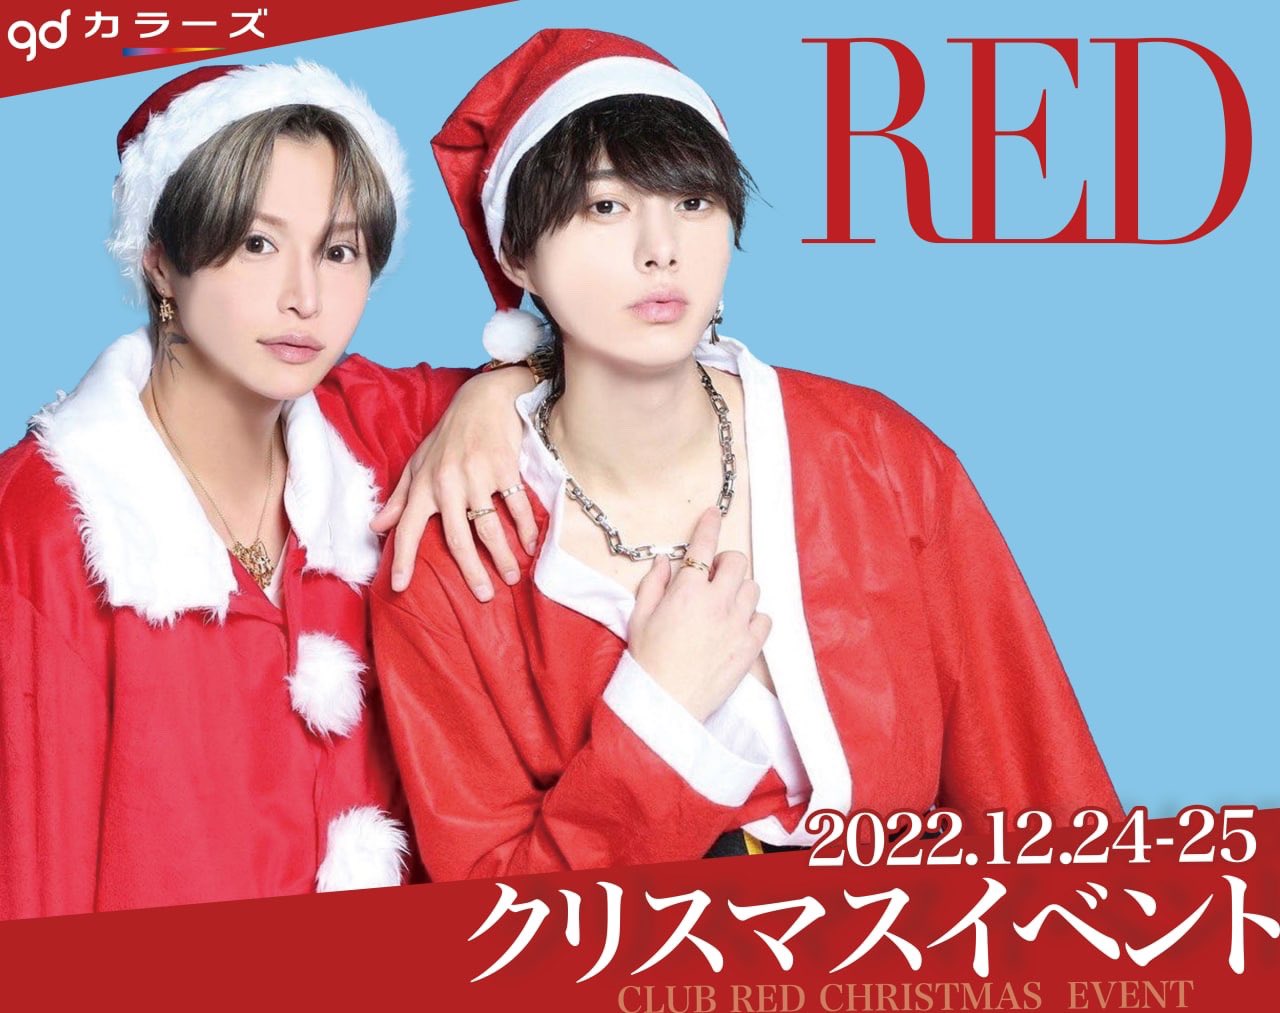 gd-カラーズ総本店【RED】 (@clubred4f) / Twitter